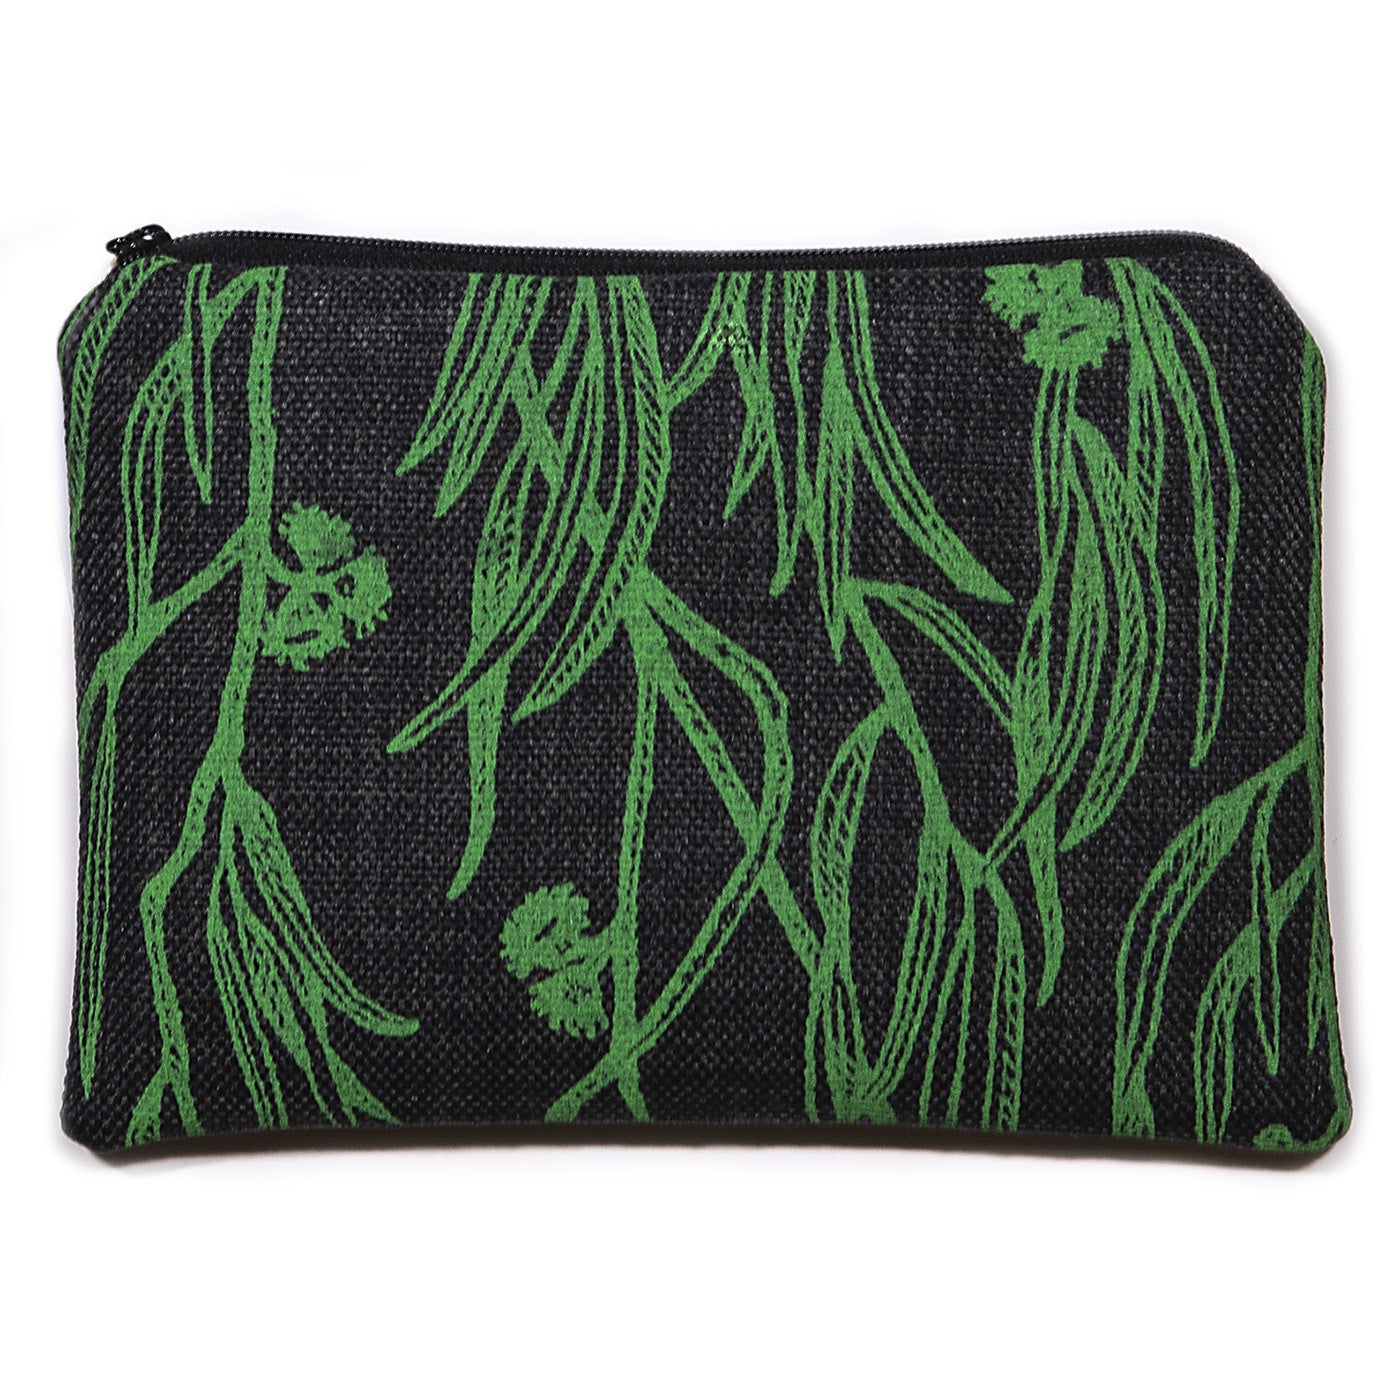 Stalley Textile Co - Zip Purse - Large - Peppermint - Green on Charcoal